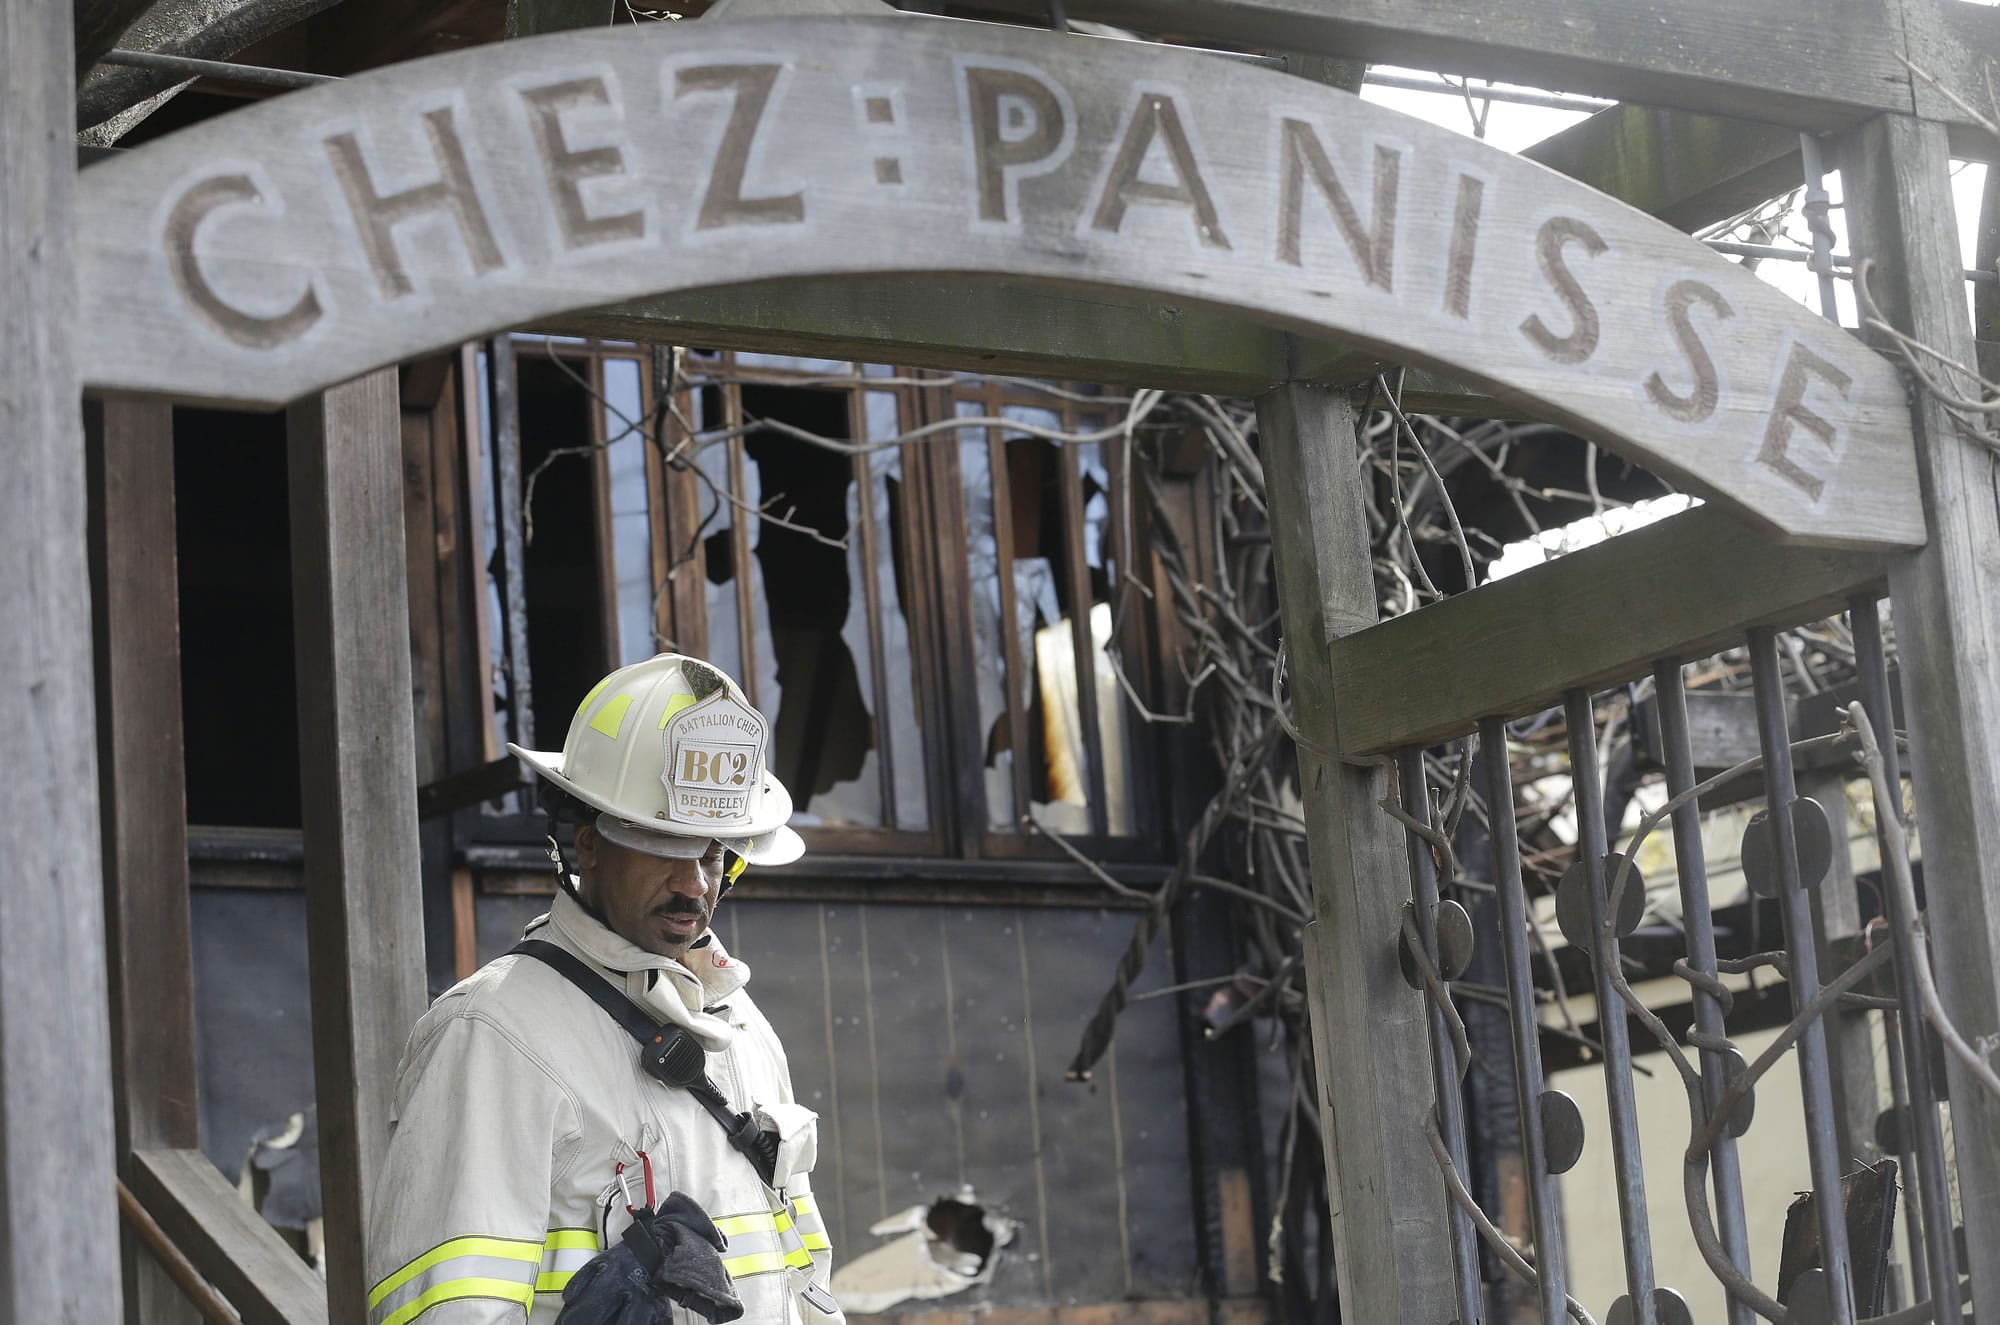 FILE - In this March 8, 2013 file photo, Acting Berkeley Fire Department Deputy Chief Avery Webb inspects damage at Chez Panisse restaurant in Berkeley, Calif. After a fire in March shut the doors to the famous gourmet restaurant, the eatery is preparing to reopen on June 24.